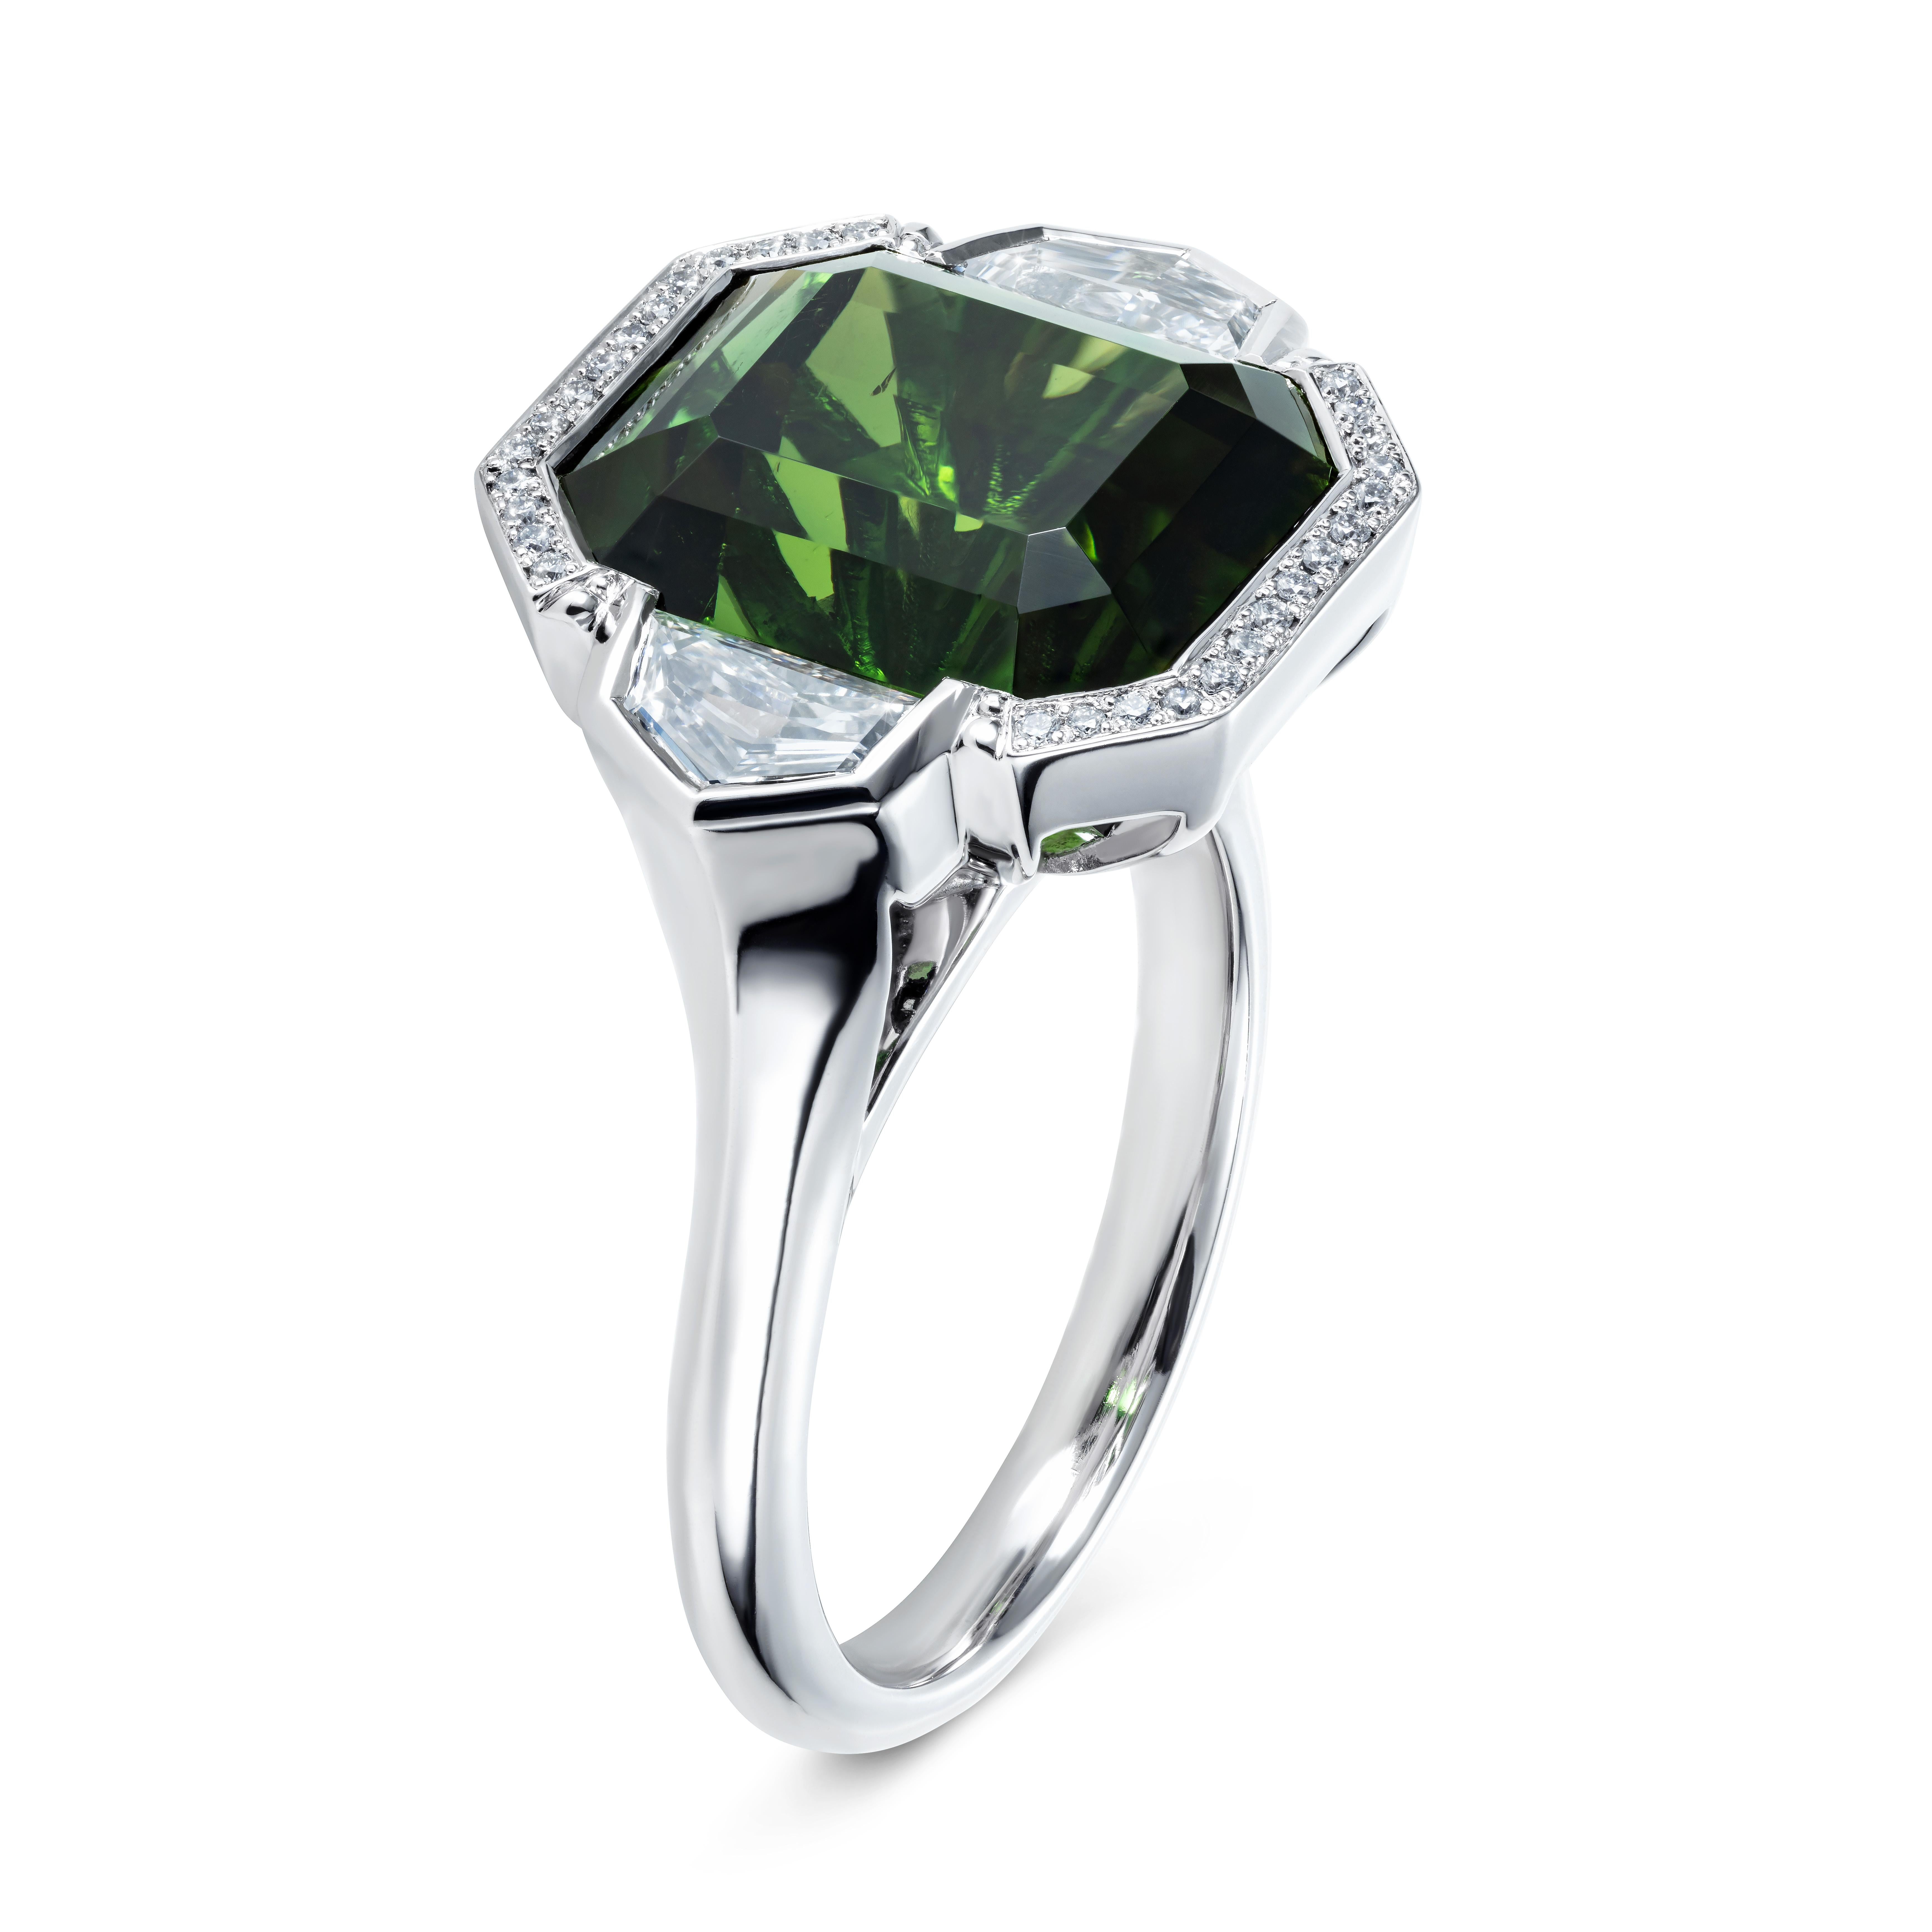 A simply stunning ring featuring a mesmerising green tourmaline.  The design is unique and skilfully made in our London workshop by a team of expert craftsmen.  We spotted the beautiful qualities of this 9.7 carat emerald cut tourmaline in its rough